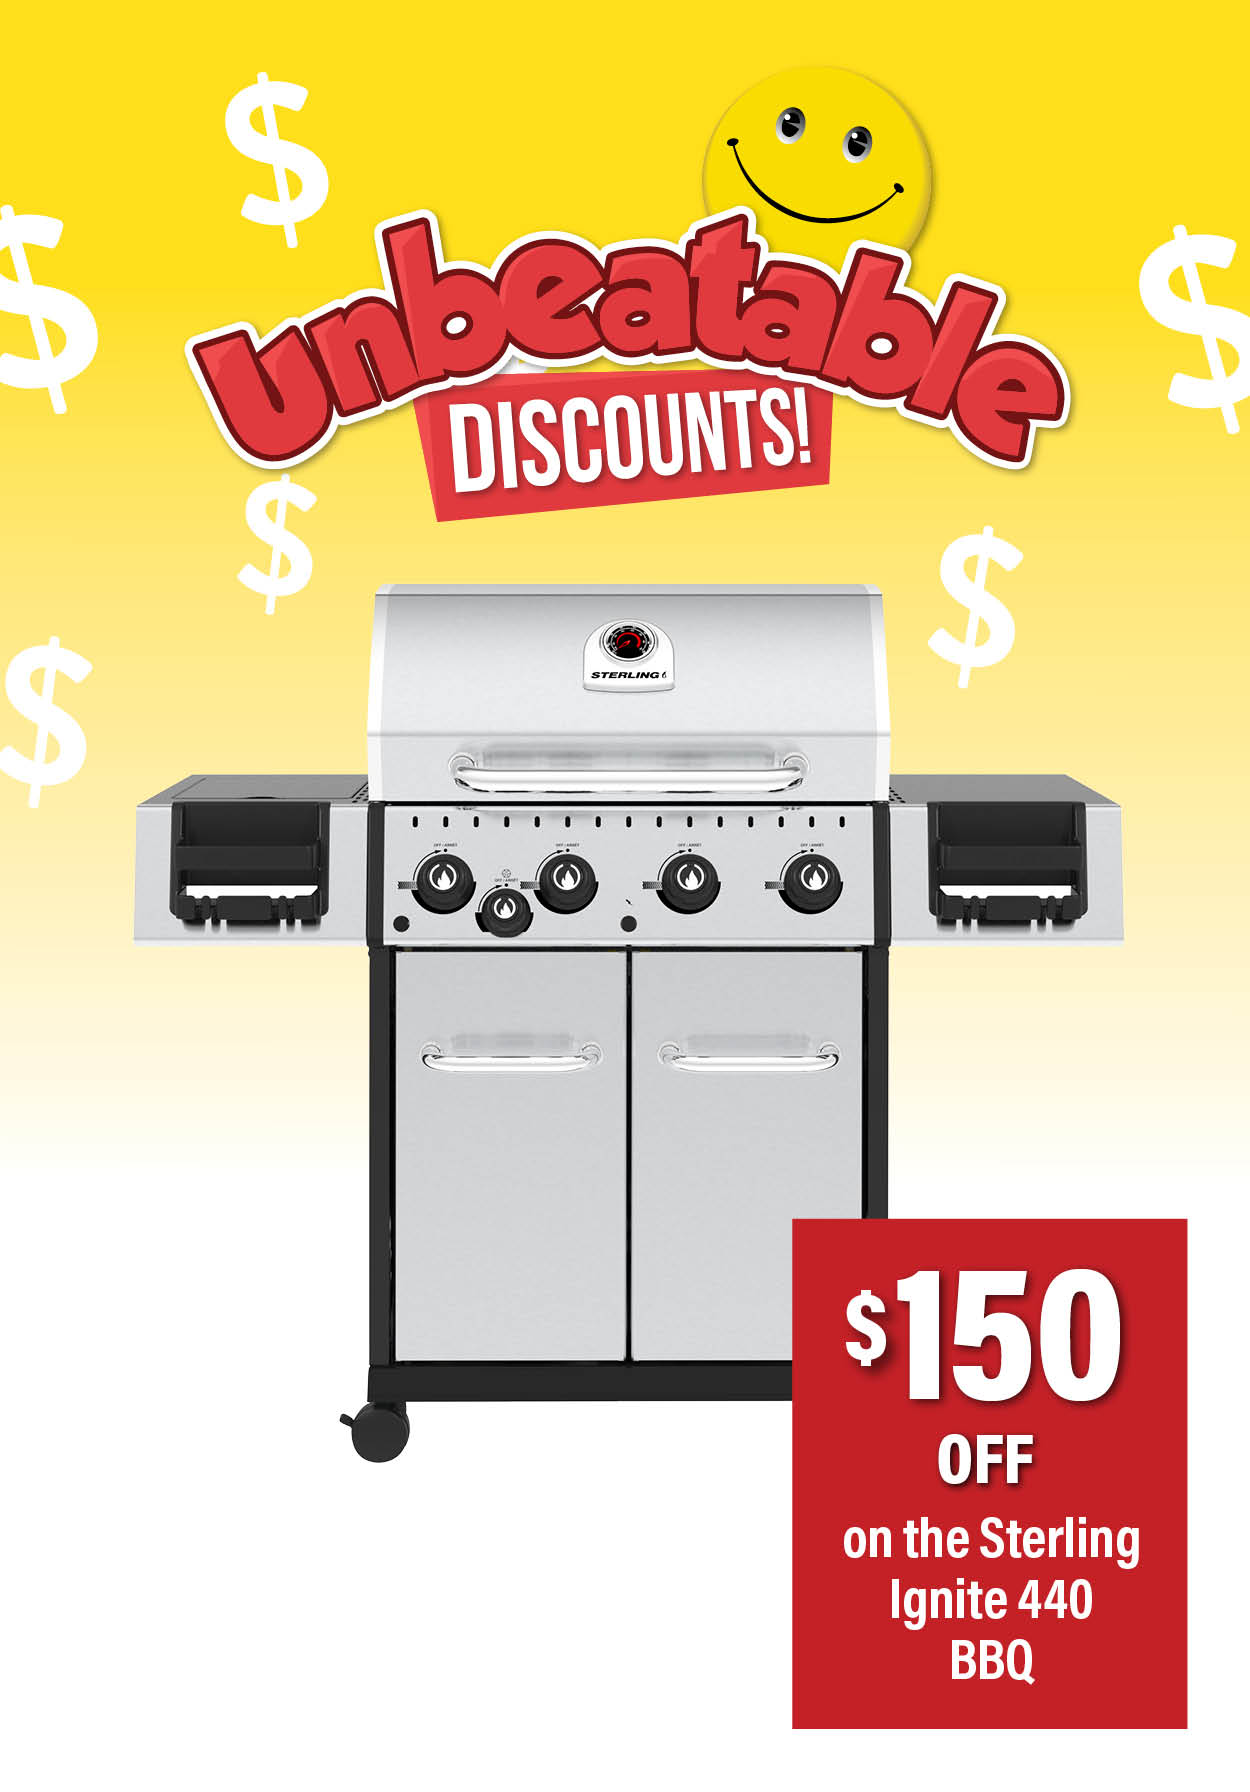 It's time to buy a BBQ for a great price